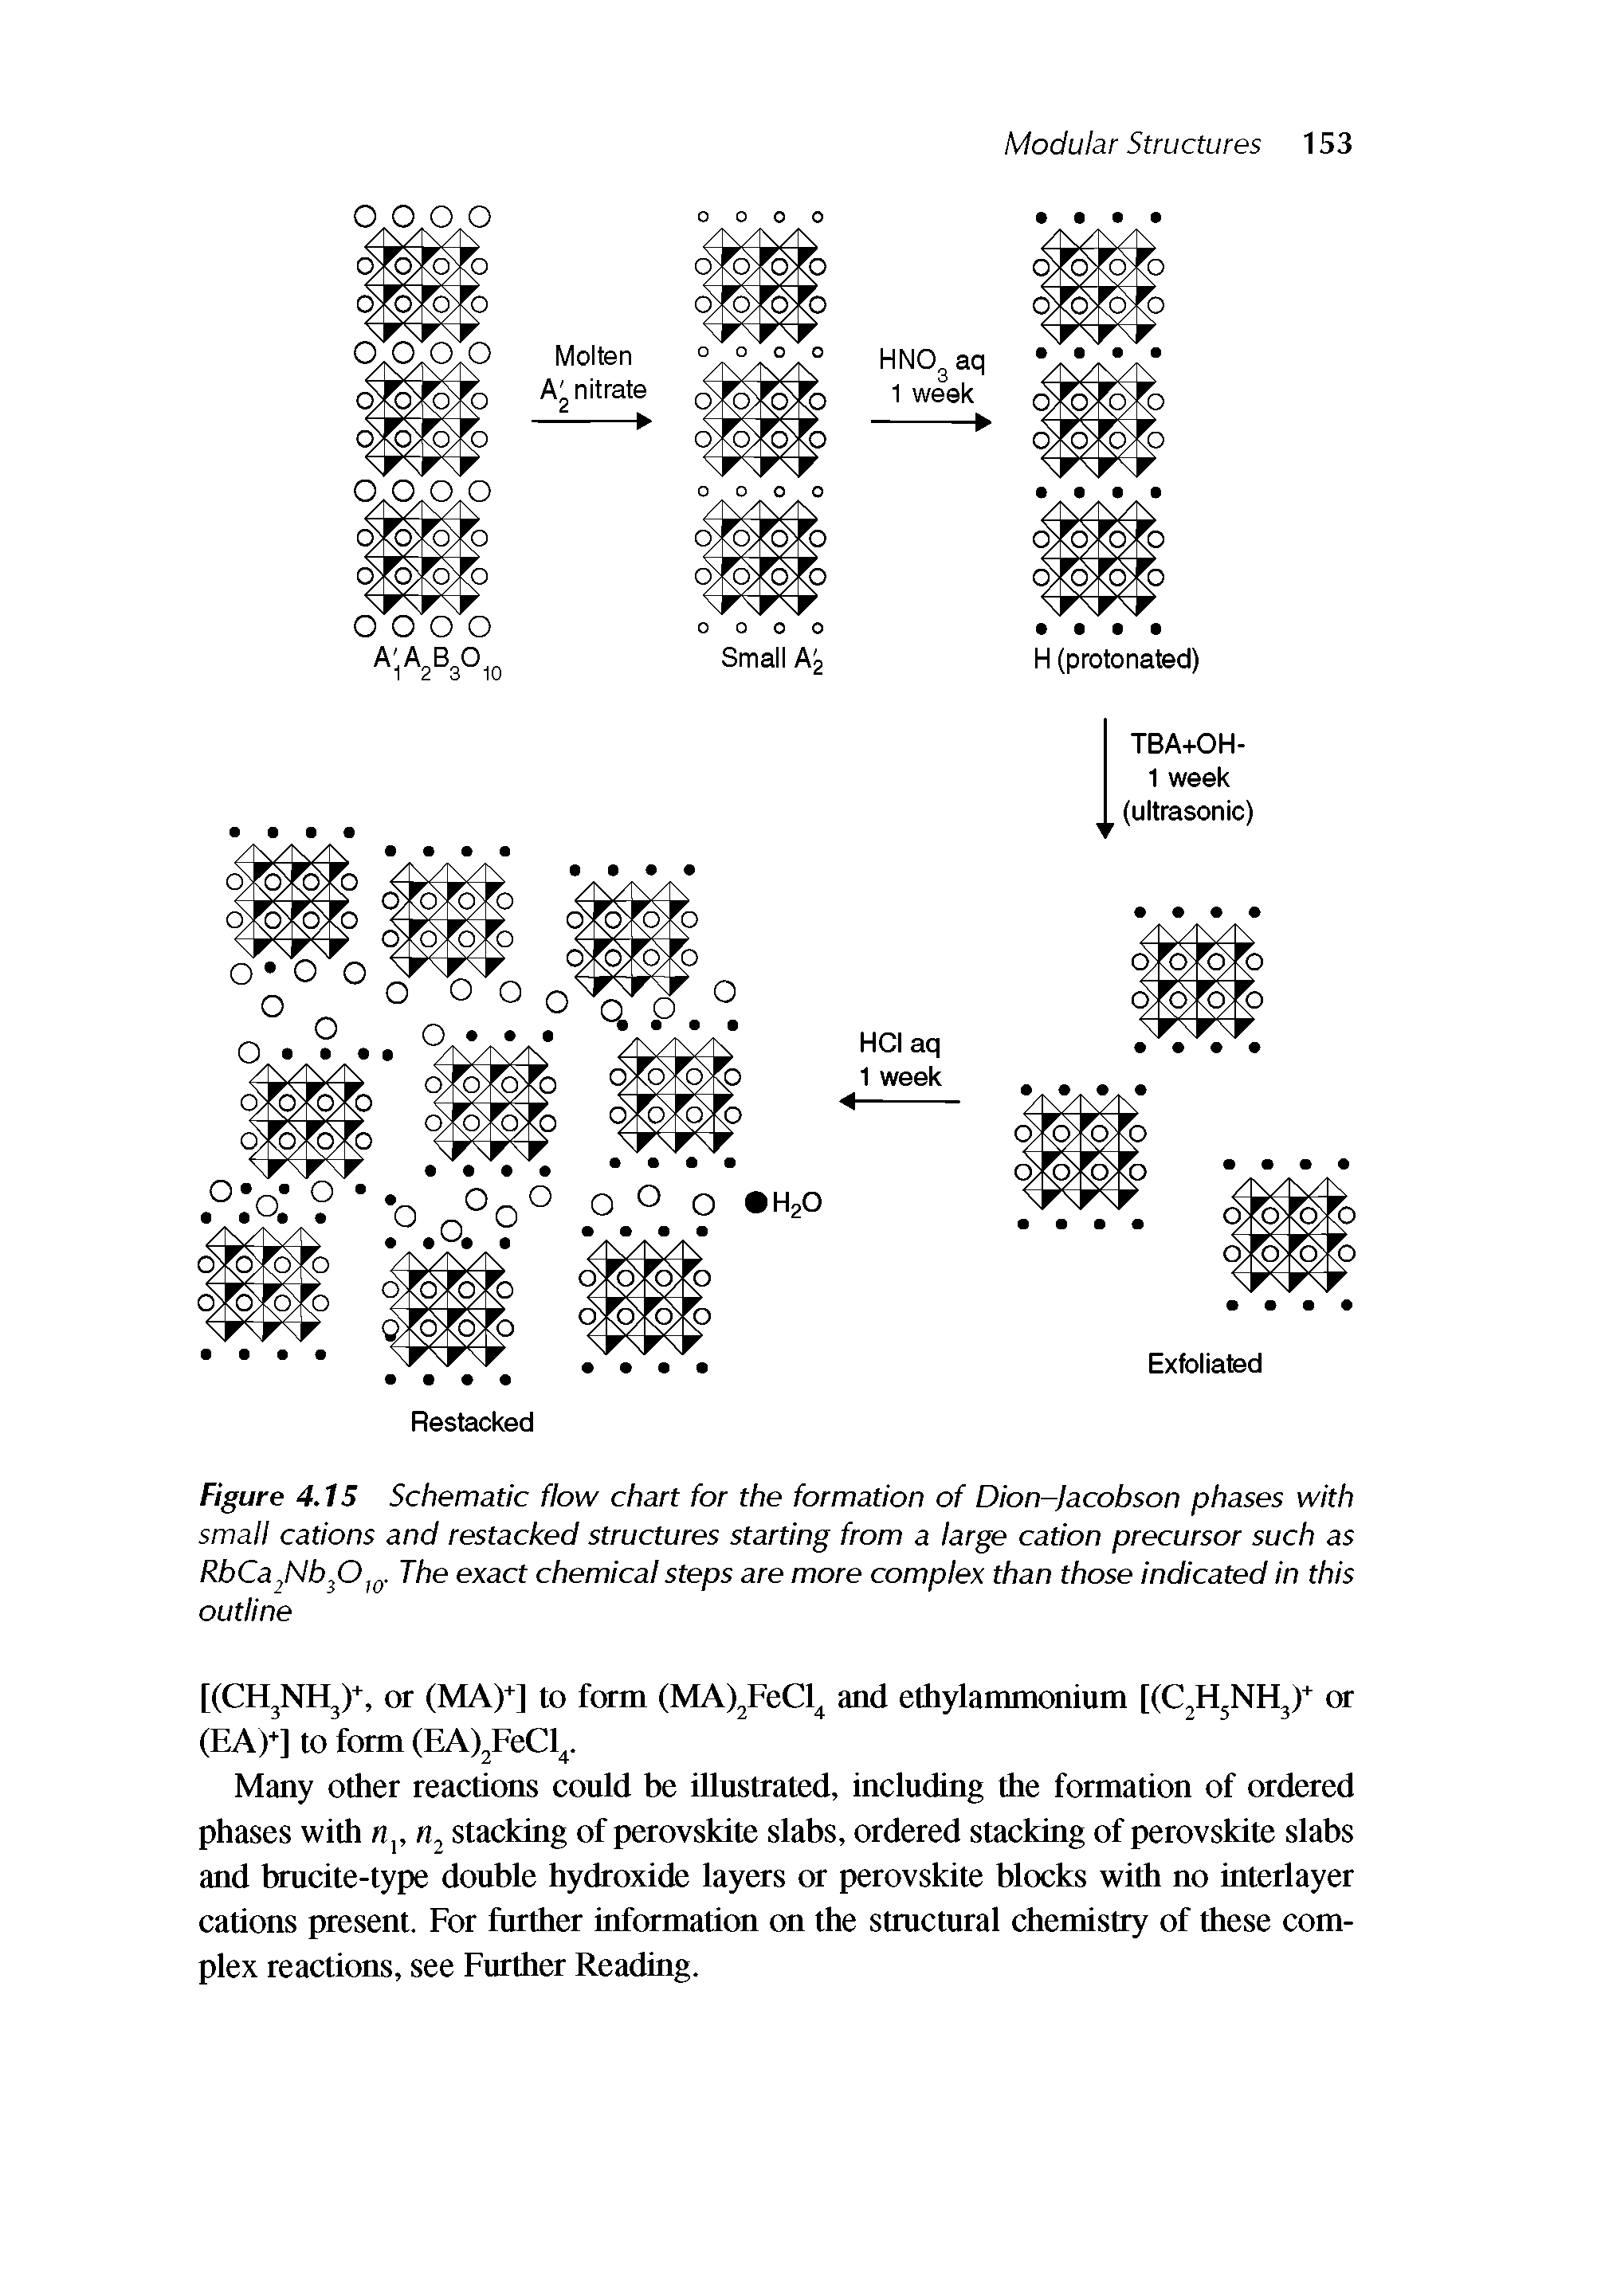 Figure 4.15 Schematic flow chart for the formation of Dion-Jacobson phases with small cations and restacked structures starting from a large cation precursor such as RbCa Nb O g. The exact chemical steps are more complex than those indicated in this outline...